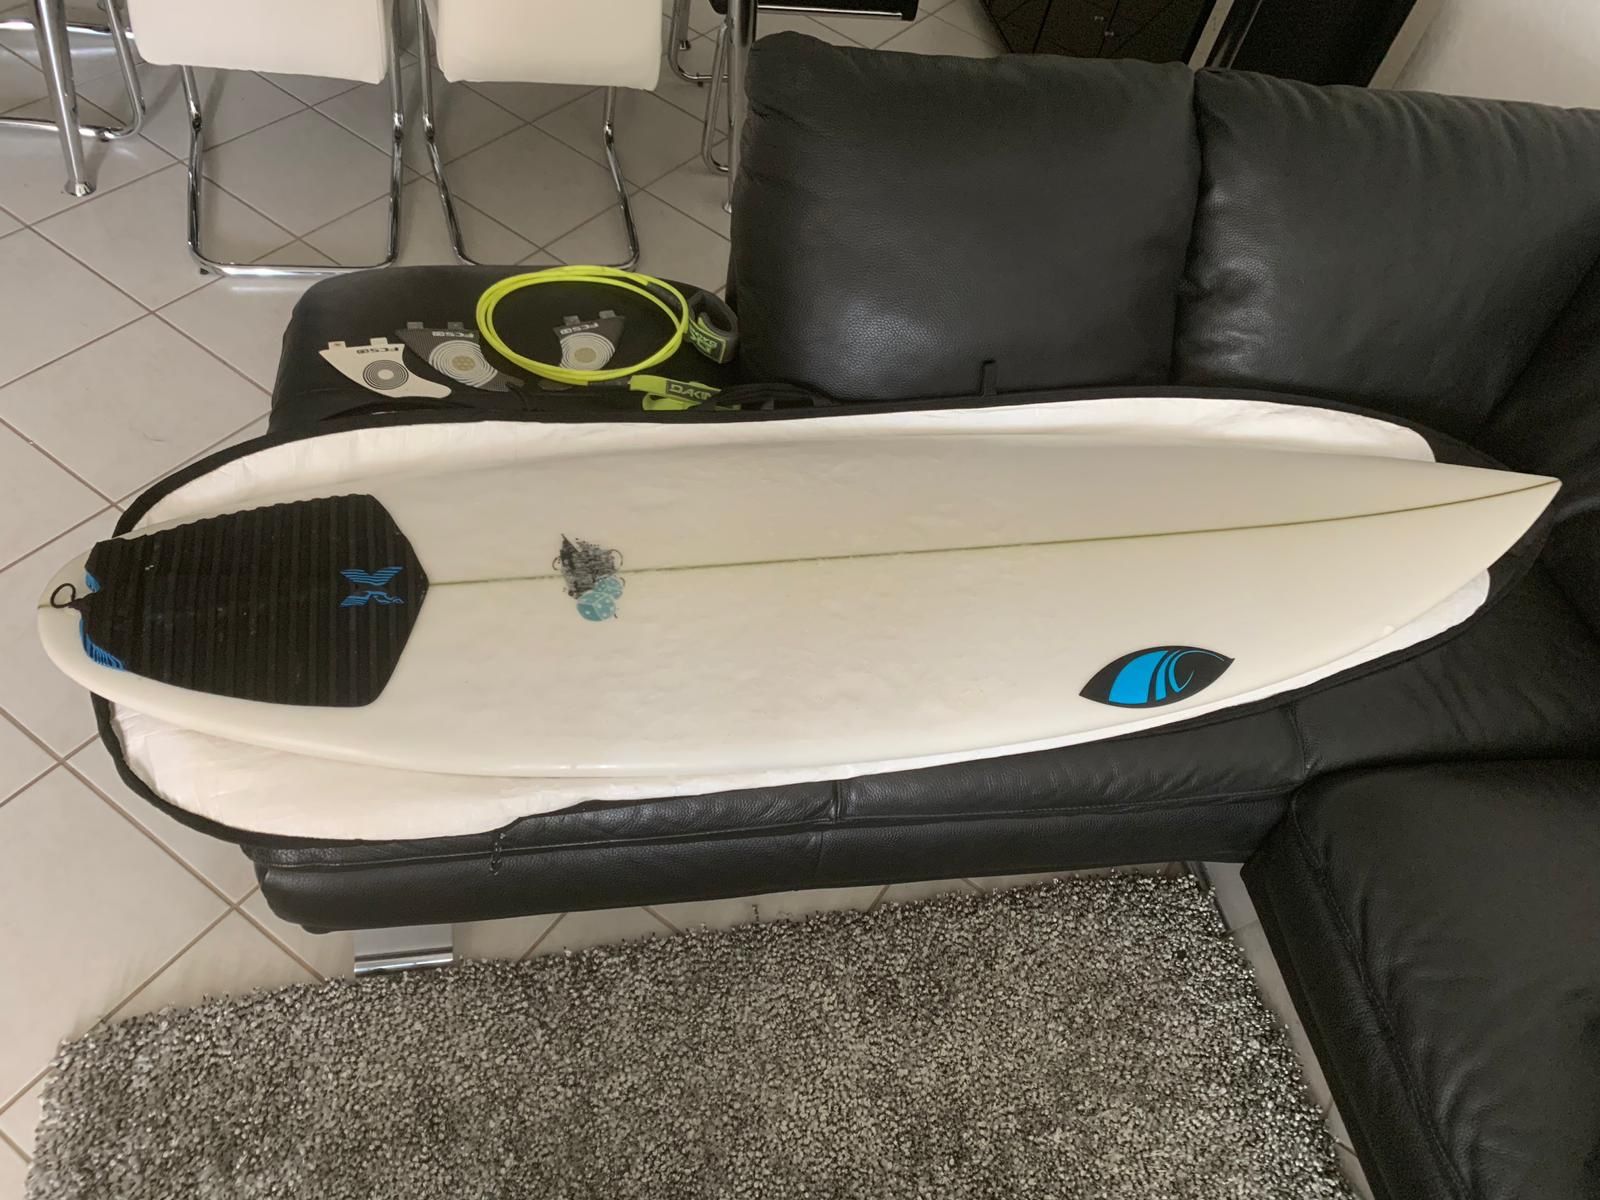 Surfboard for sale !!! surfboard Sharpeye 6-2 great condition only owner .. leash included I am not surfing anymore ..